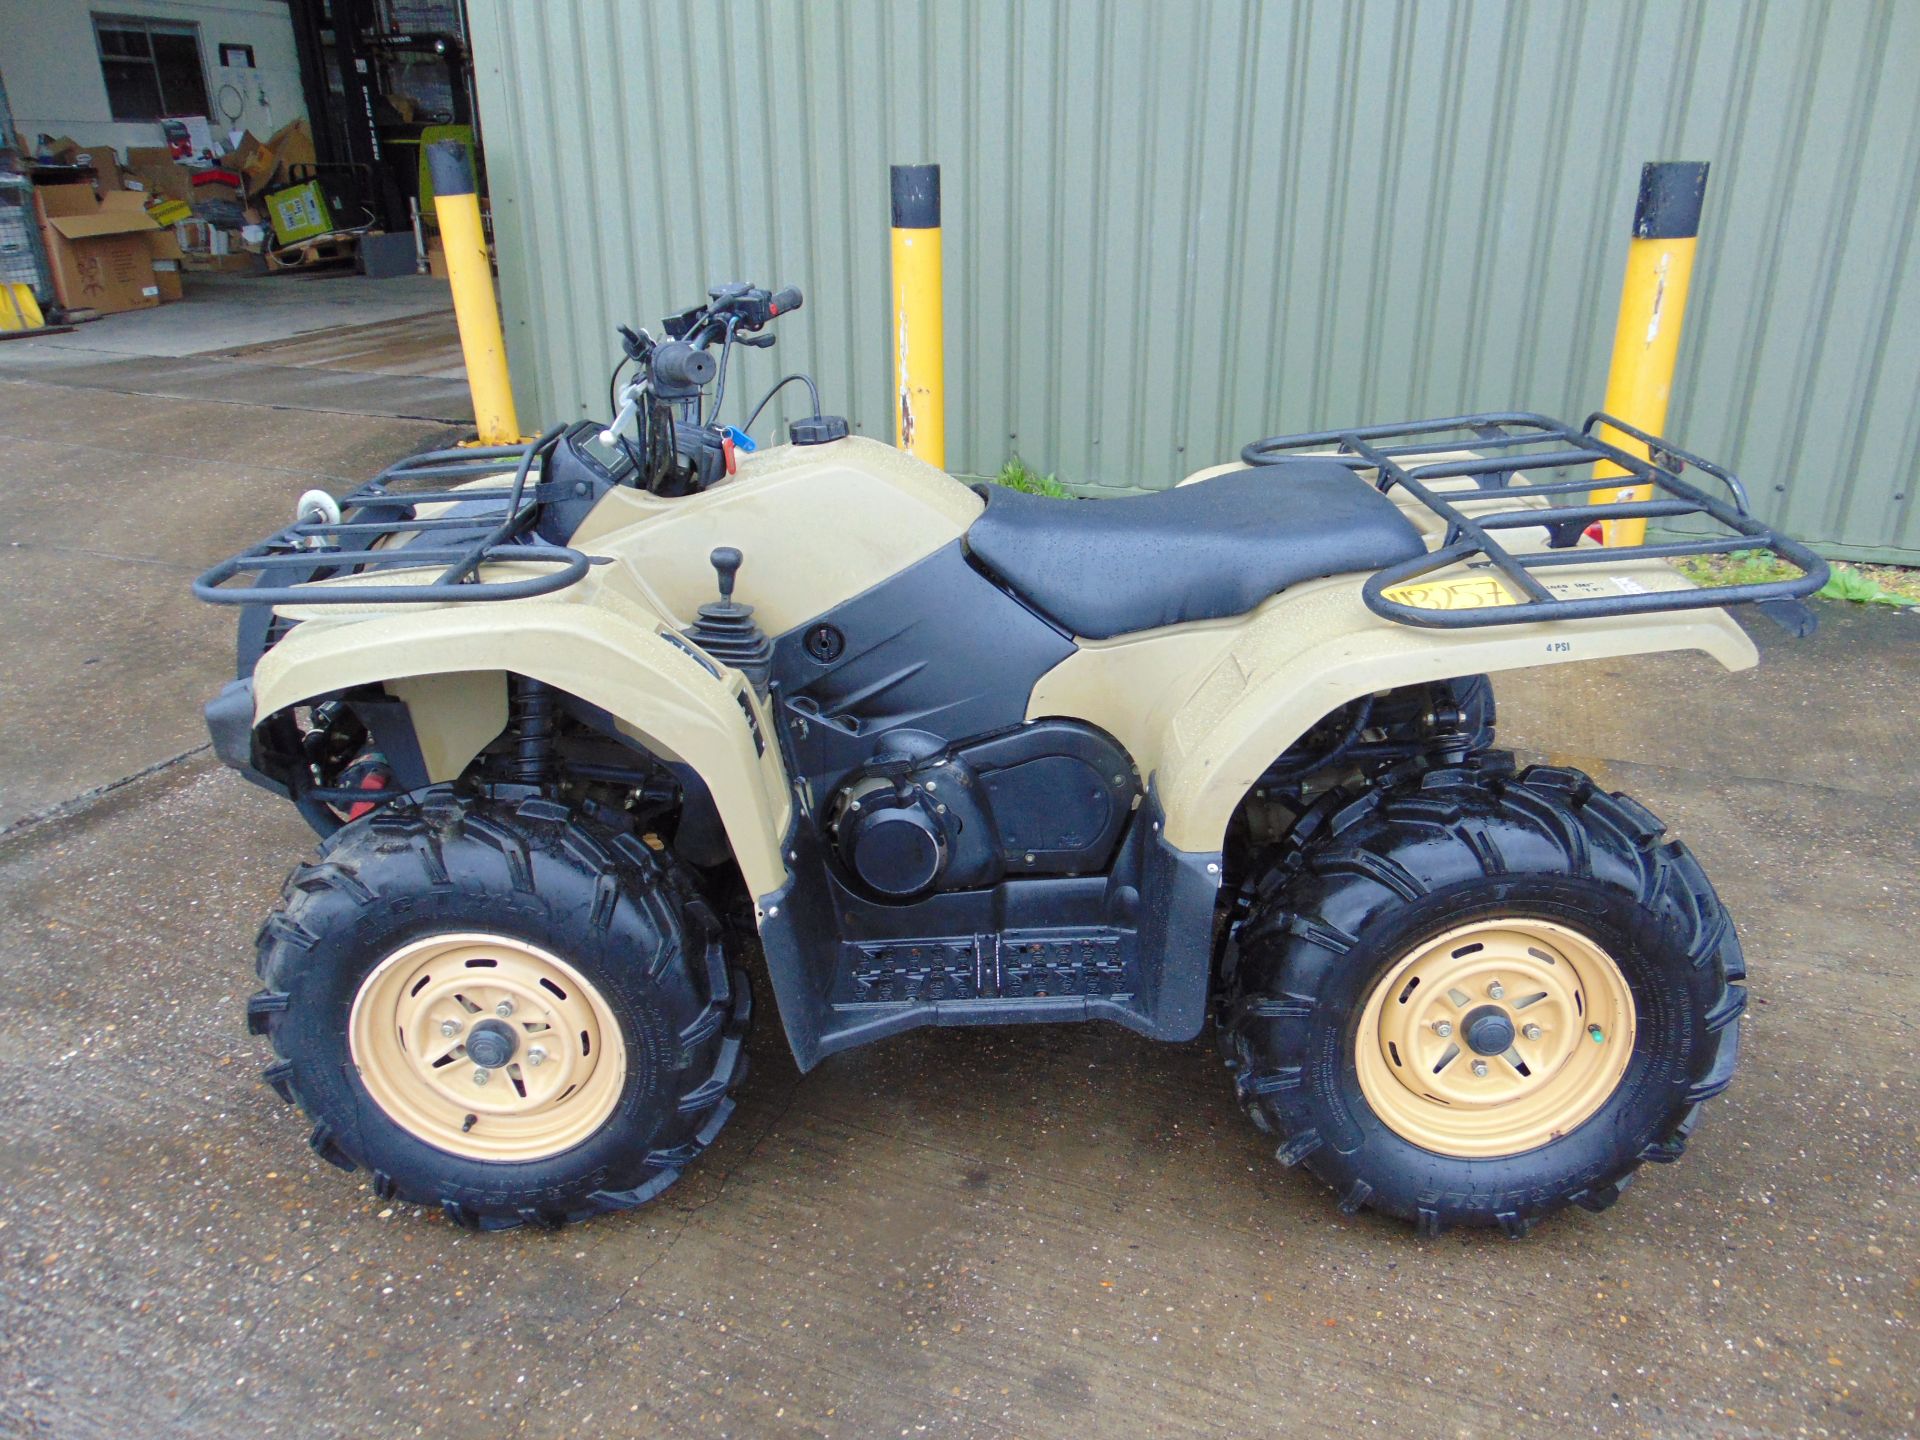 Yamaha Grizzly 450 4 x 4 ATV Quad Bike 1518 hours only from MOD - Image 3 of 24